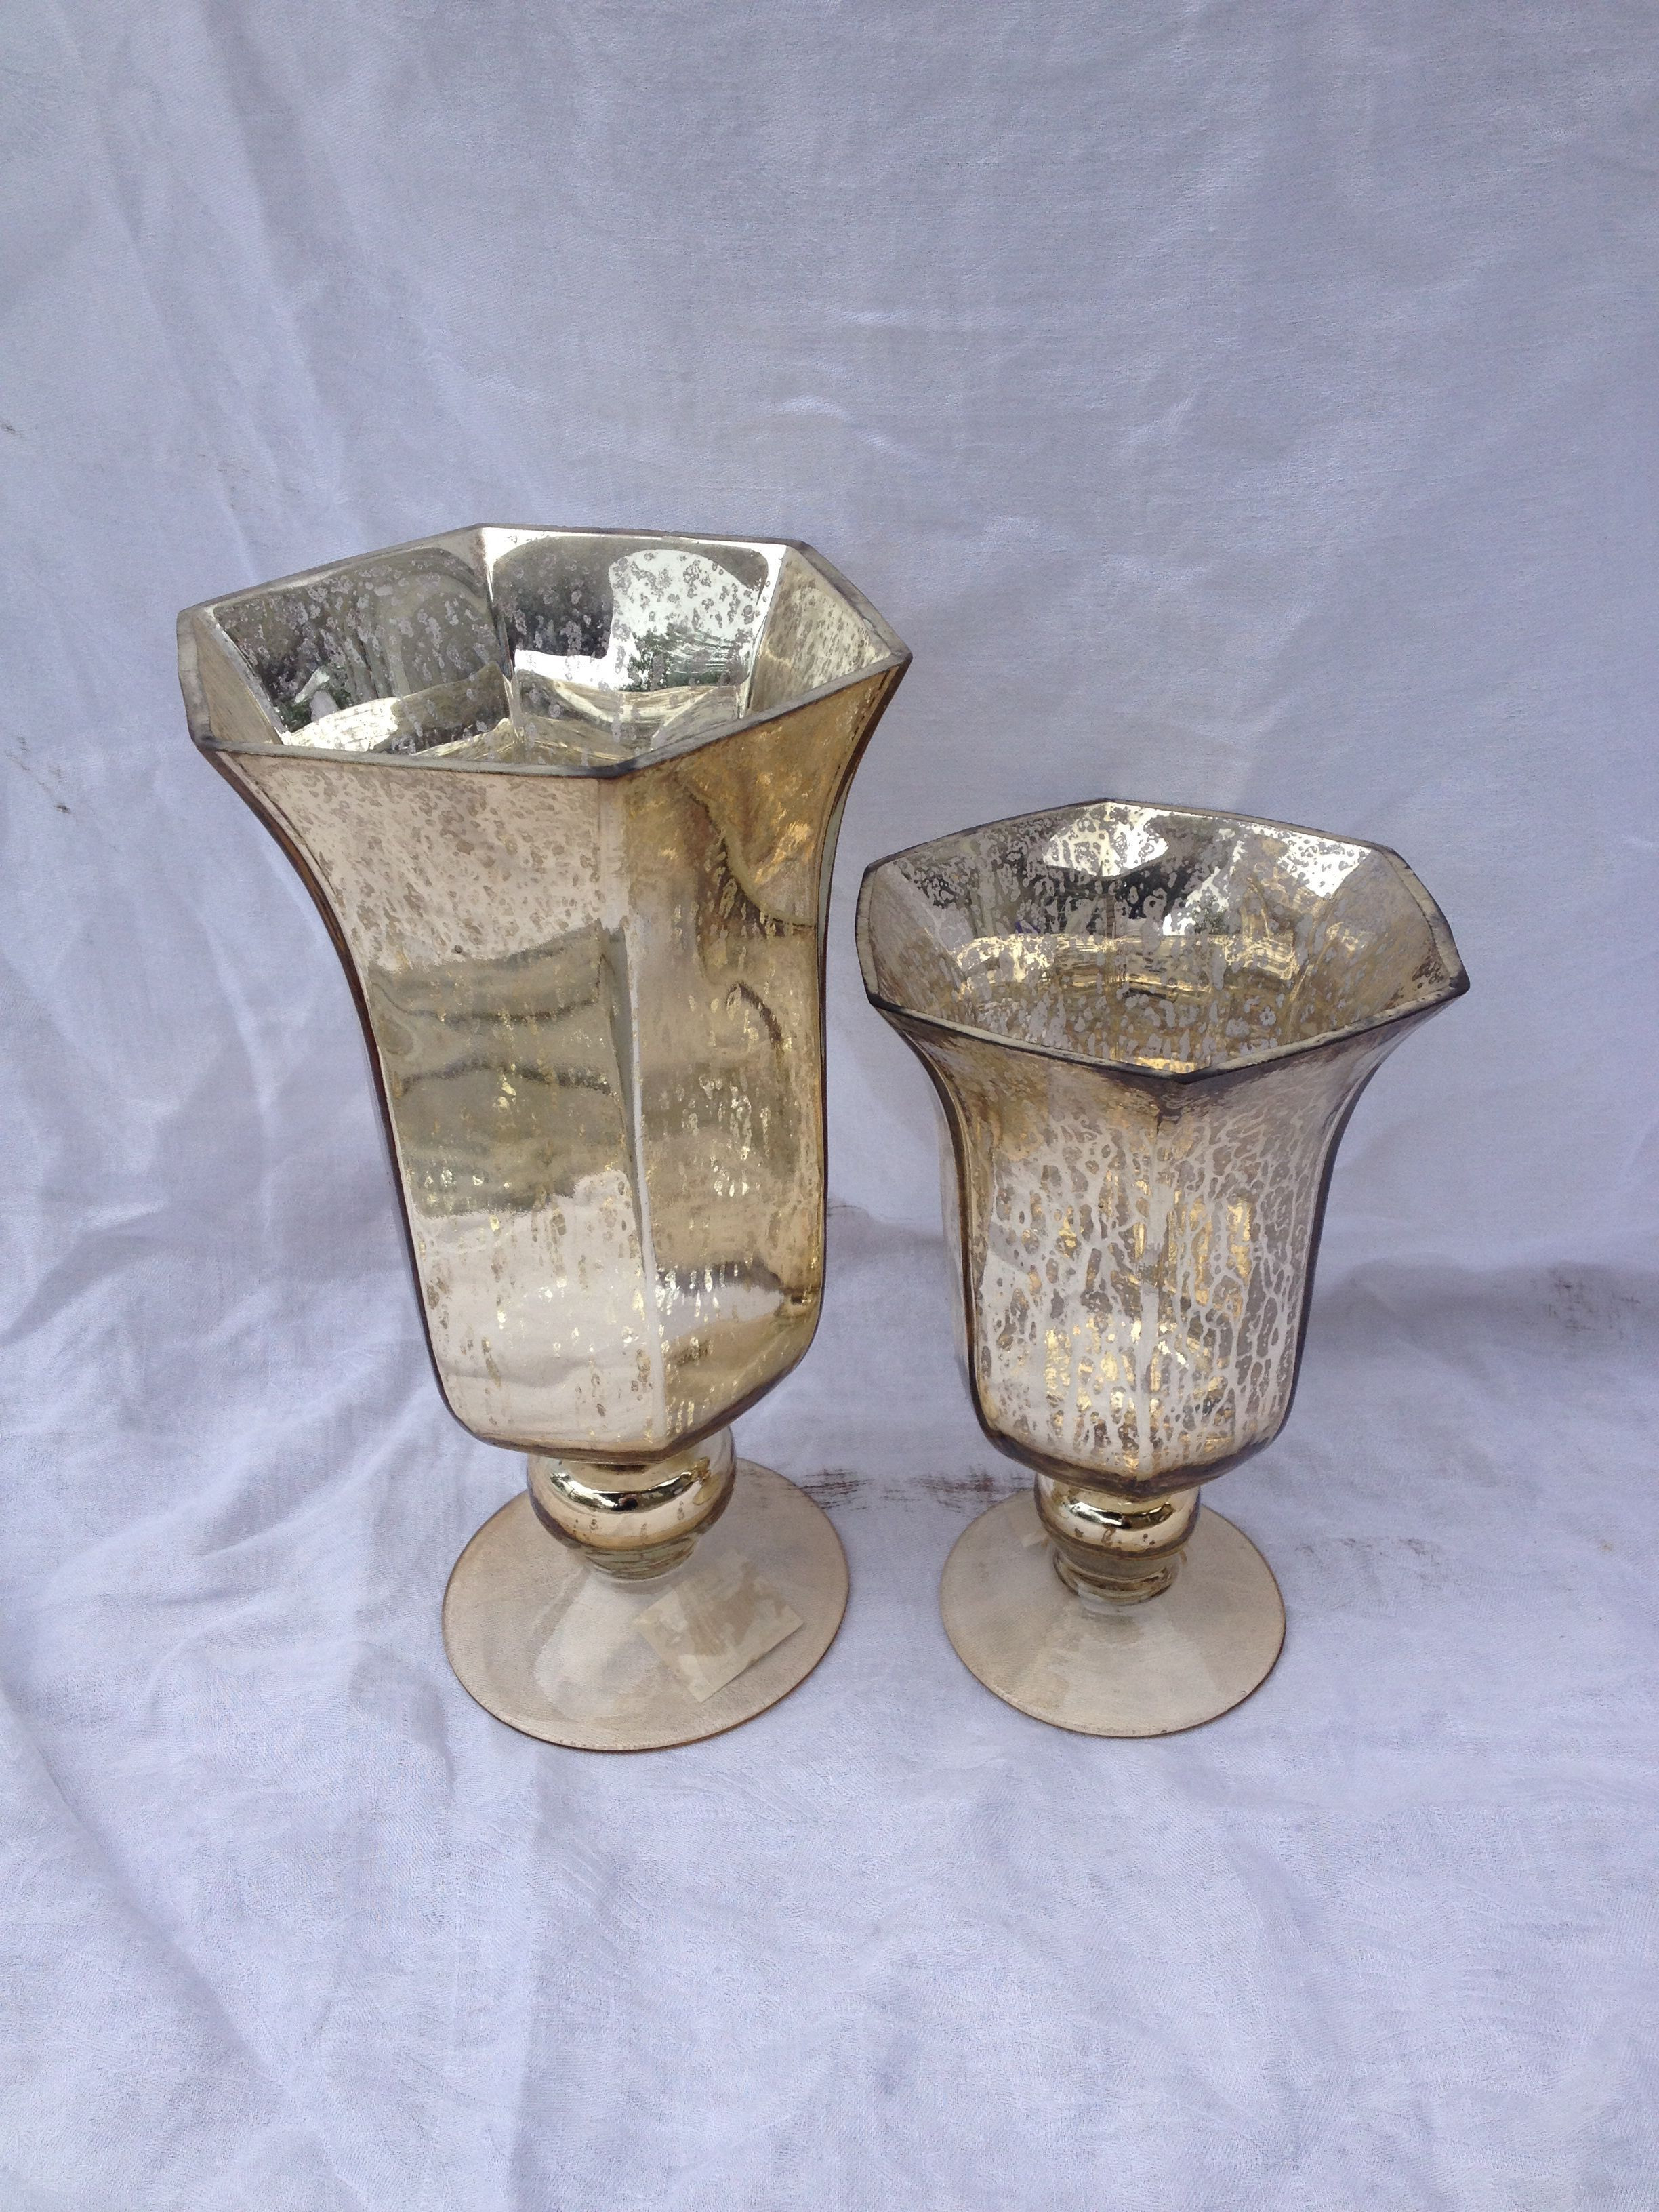 22 Fantastic Footed Glass Hurricane Vase 2024 free download footed glass hurricane vase of 34 gold mercury glass vases the weekly world in gold mercury glass lida vase inspiration pinterest